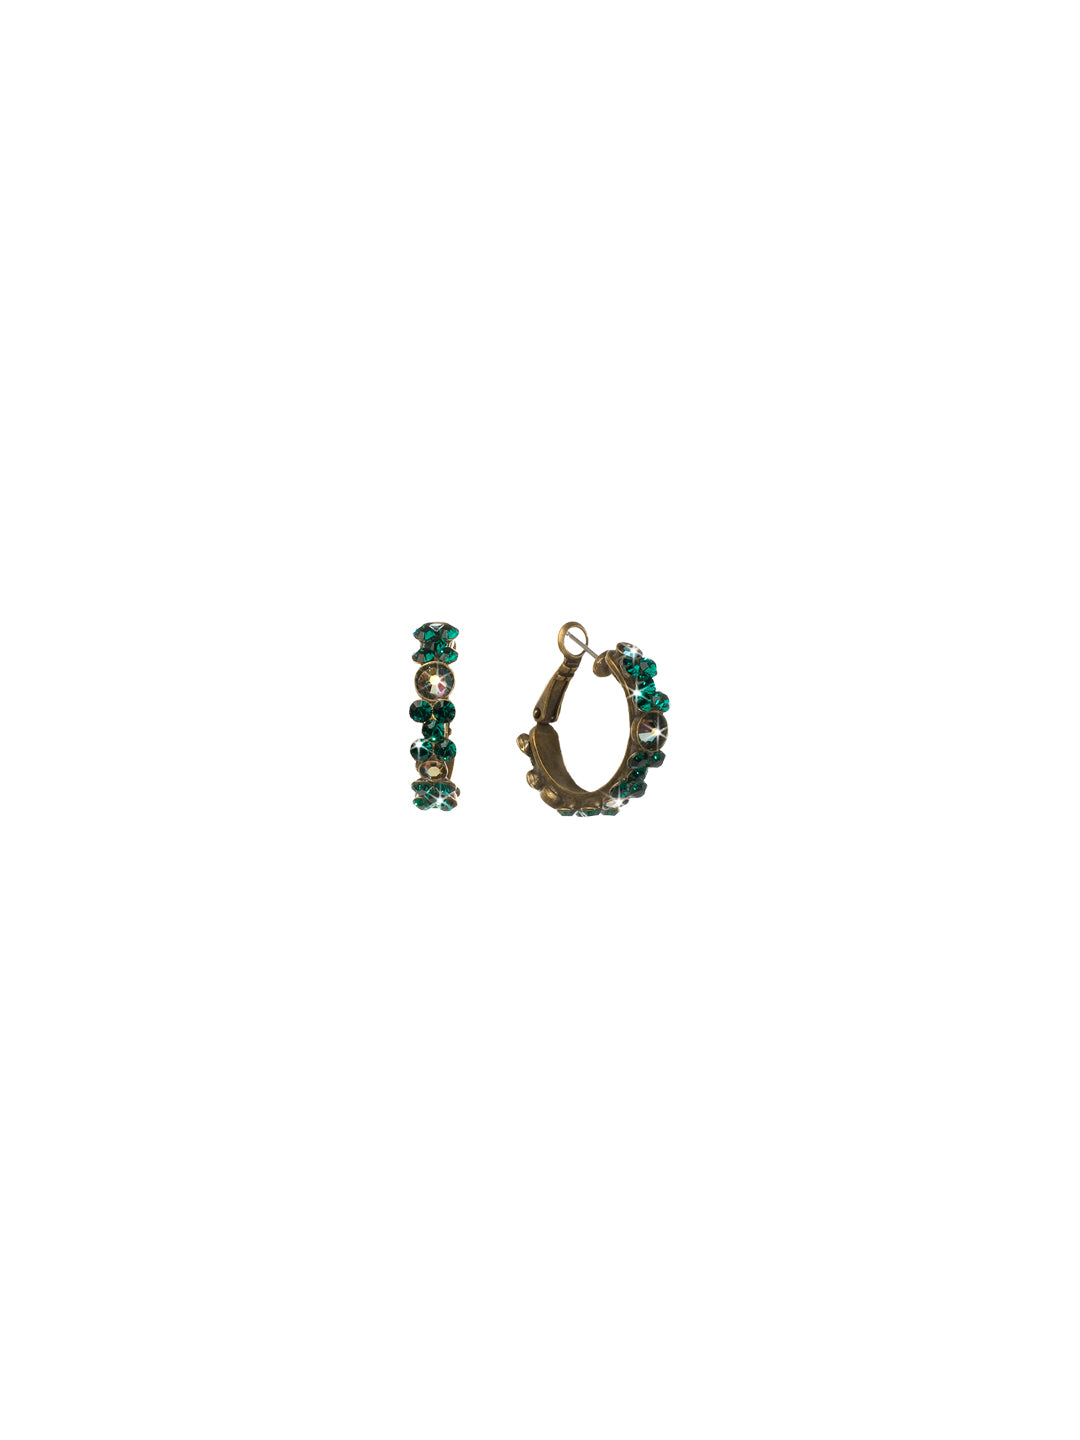 Floral Hoop Earrings - EBP15AGEME - <p>Intricate design, infused with gorgeous shine. A motif of floral clusters is featured here on a small, delicate hoop with a hinged post backing. From Sorrelli's Emerald collection in our Antique Gold-tone finish.</p>